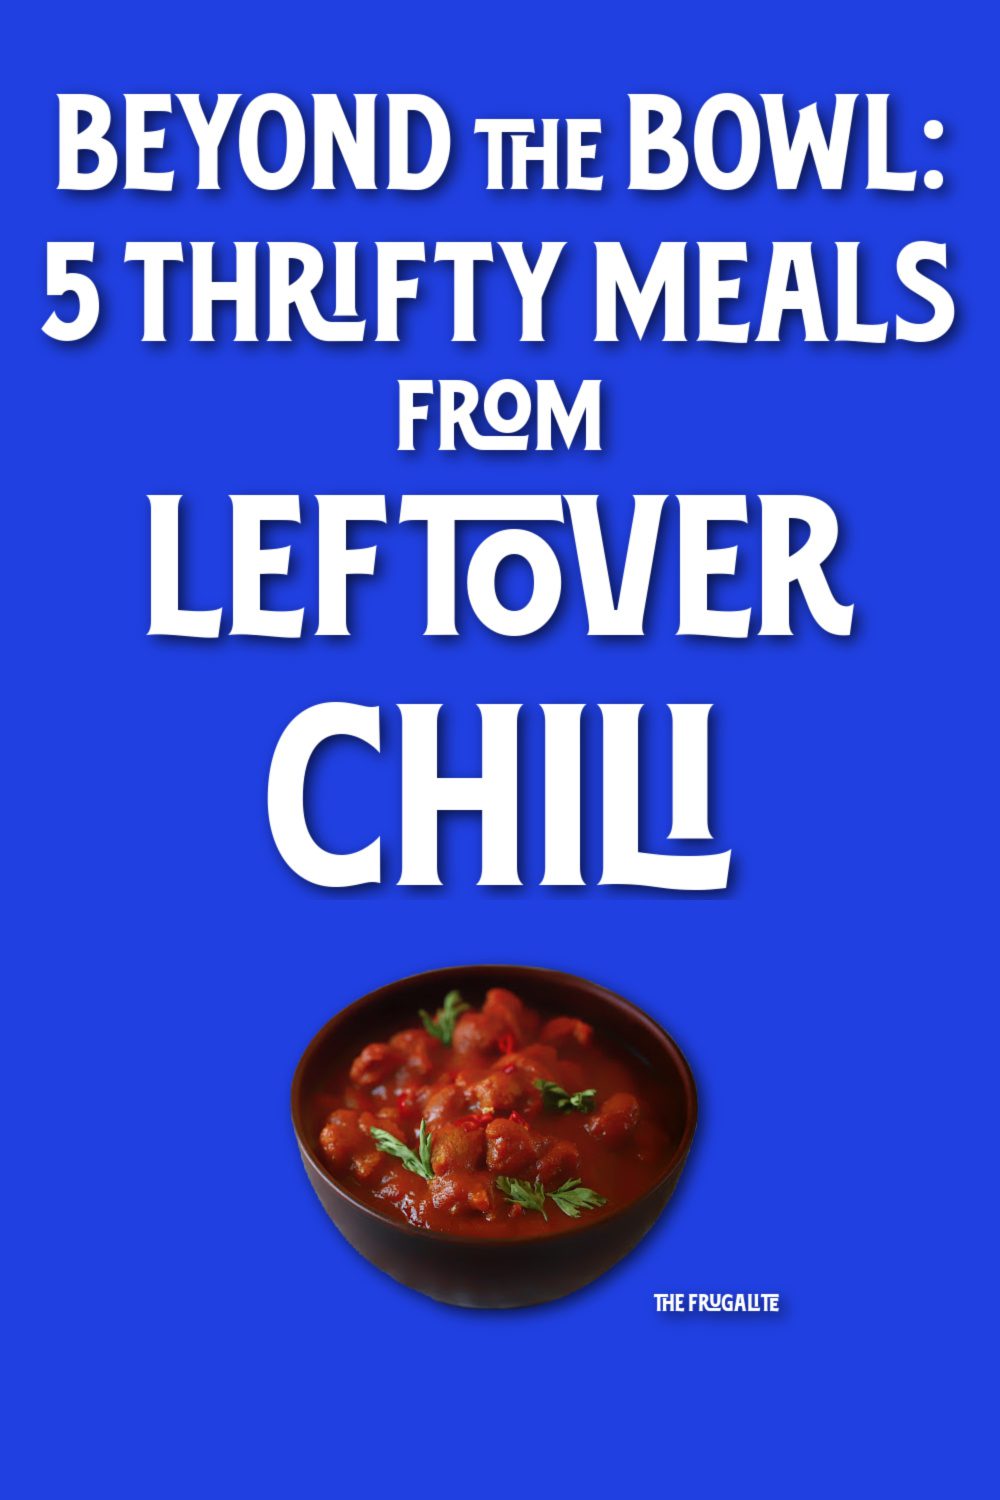 Beyond the Bowl: 5 Thrifty Meals from Leftover Chili